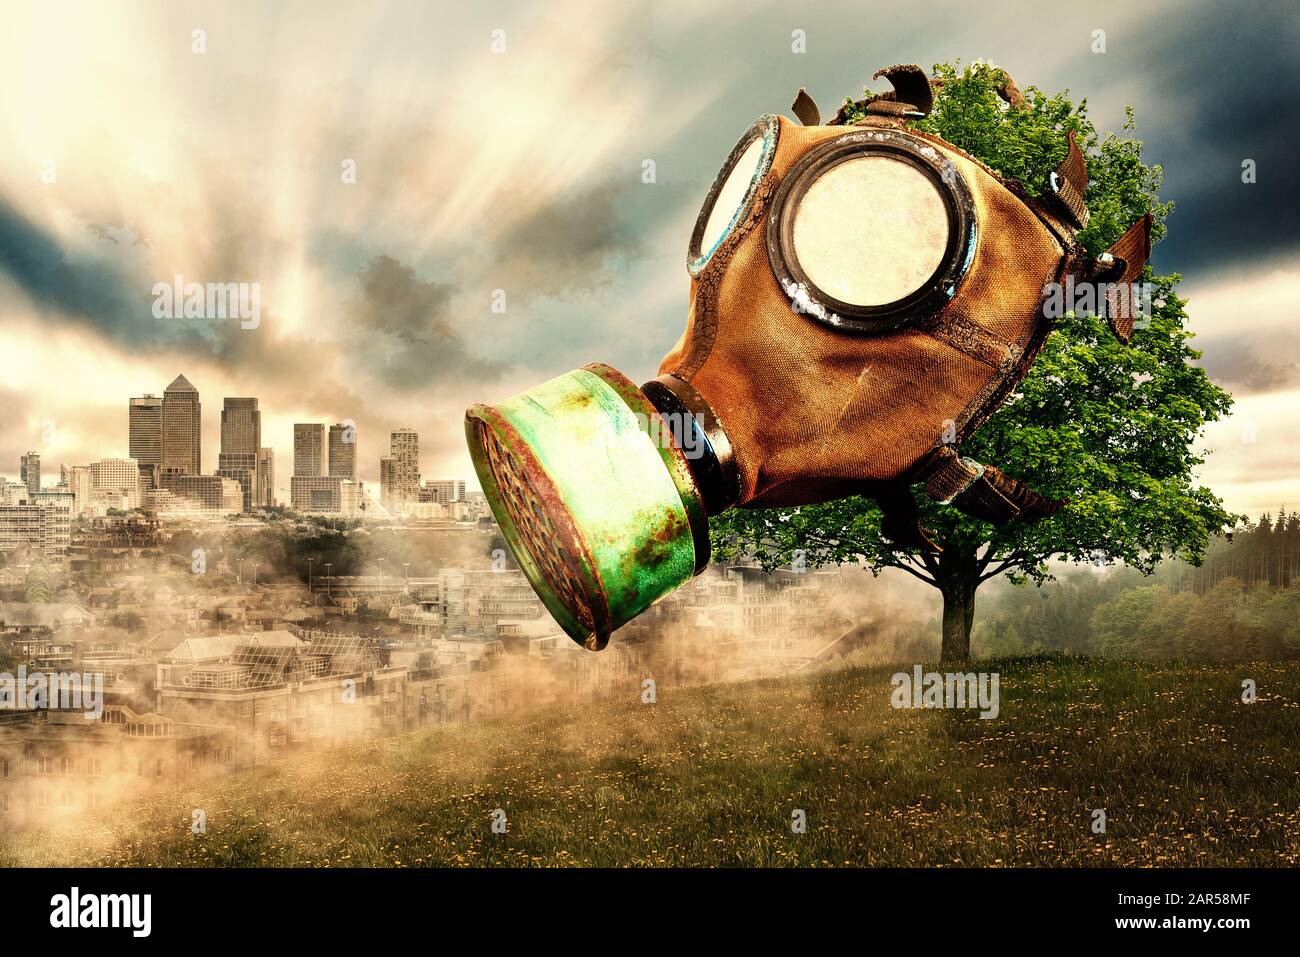 Tree with gas mask, background with city in smog, global warming due to air pollution, Stock Photo